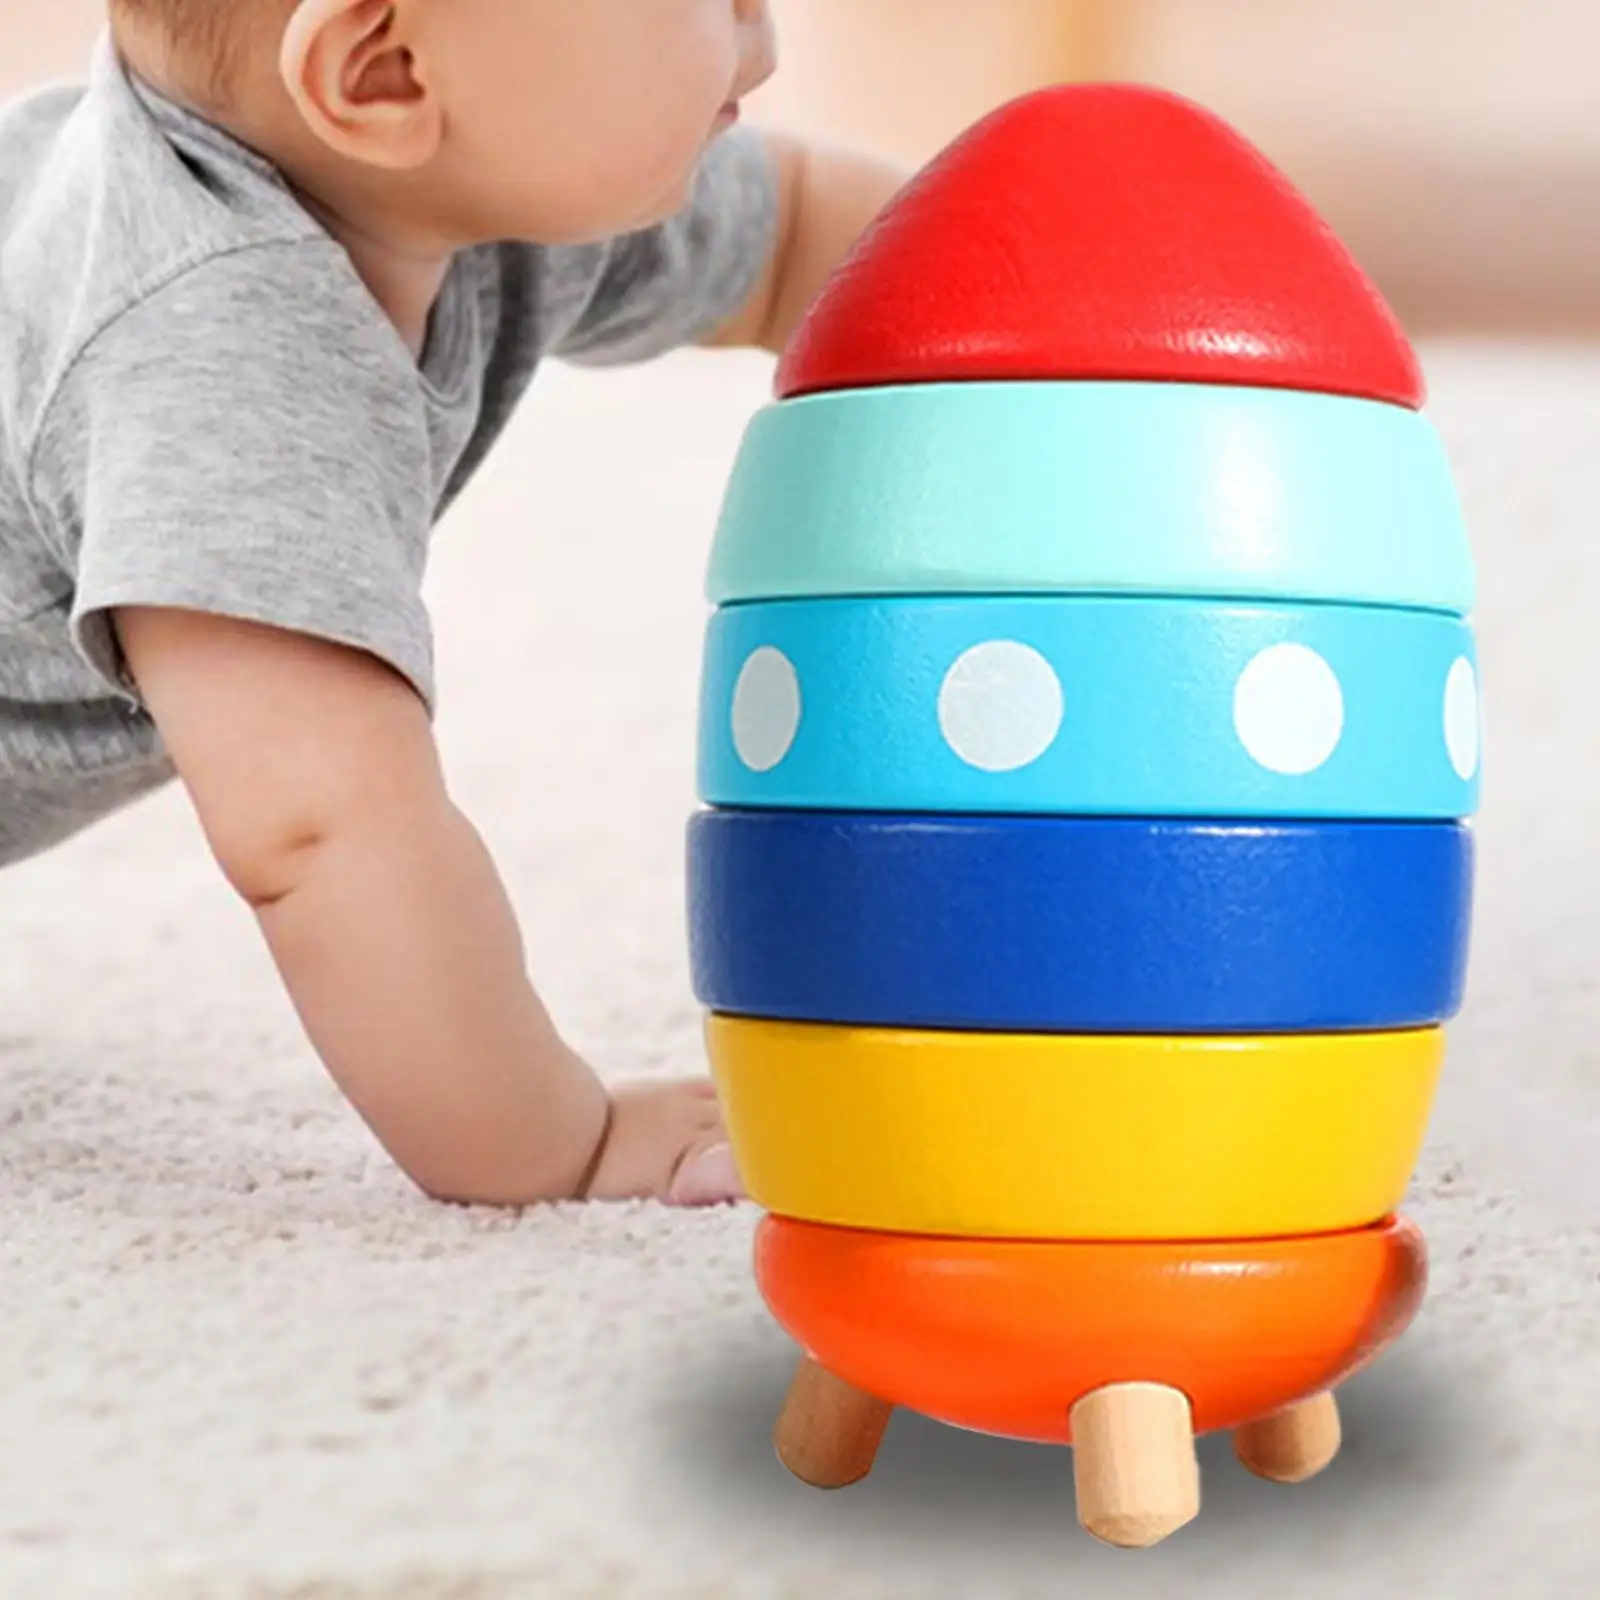 Montessori Babies Colorful Rocket Shaped Stacking Toys,Fine Motor Skills Puzzle,Early Learning Nesting Blocks for Children